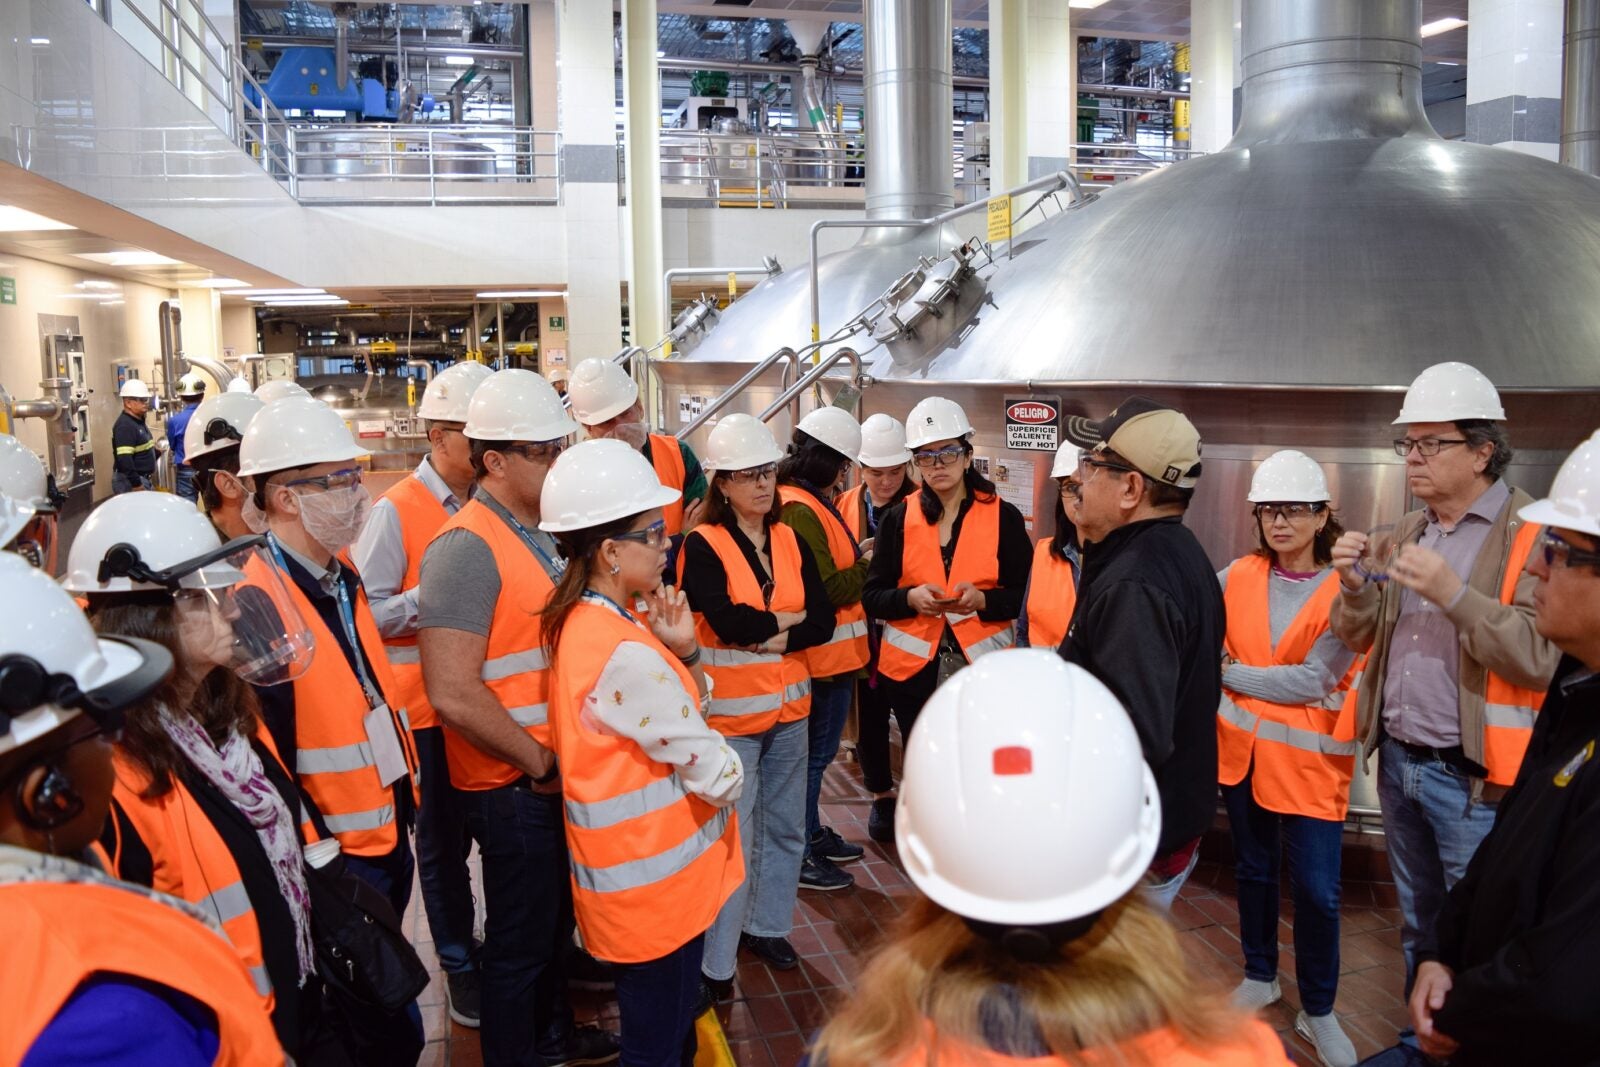 People in orange vests and white hard hats visiting a facility